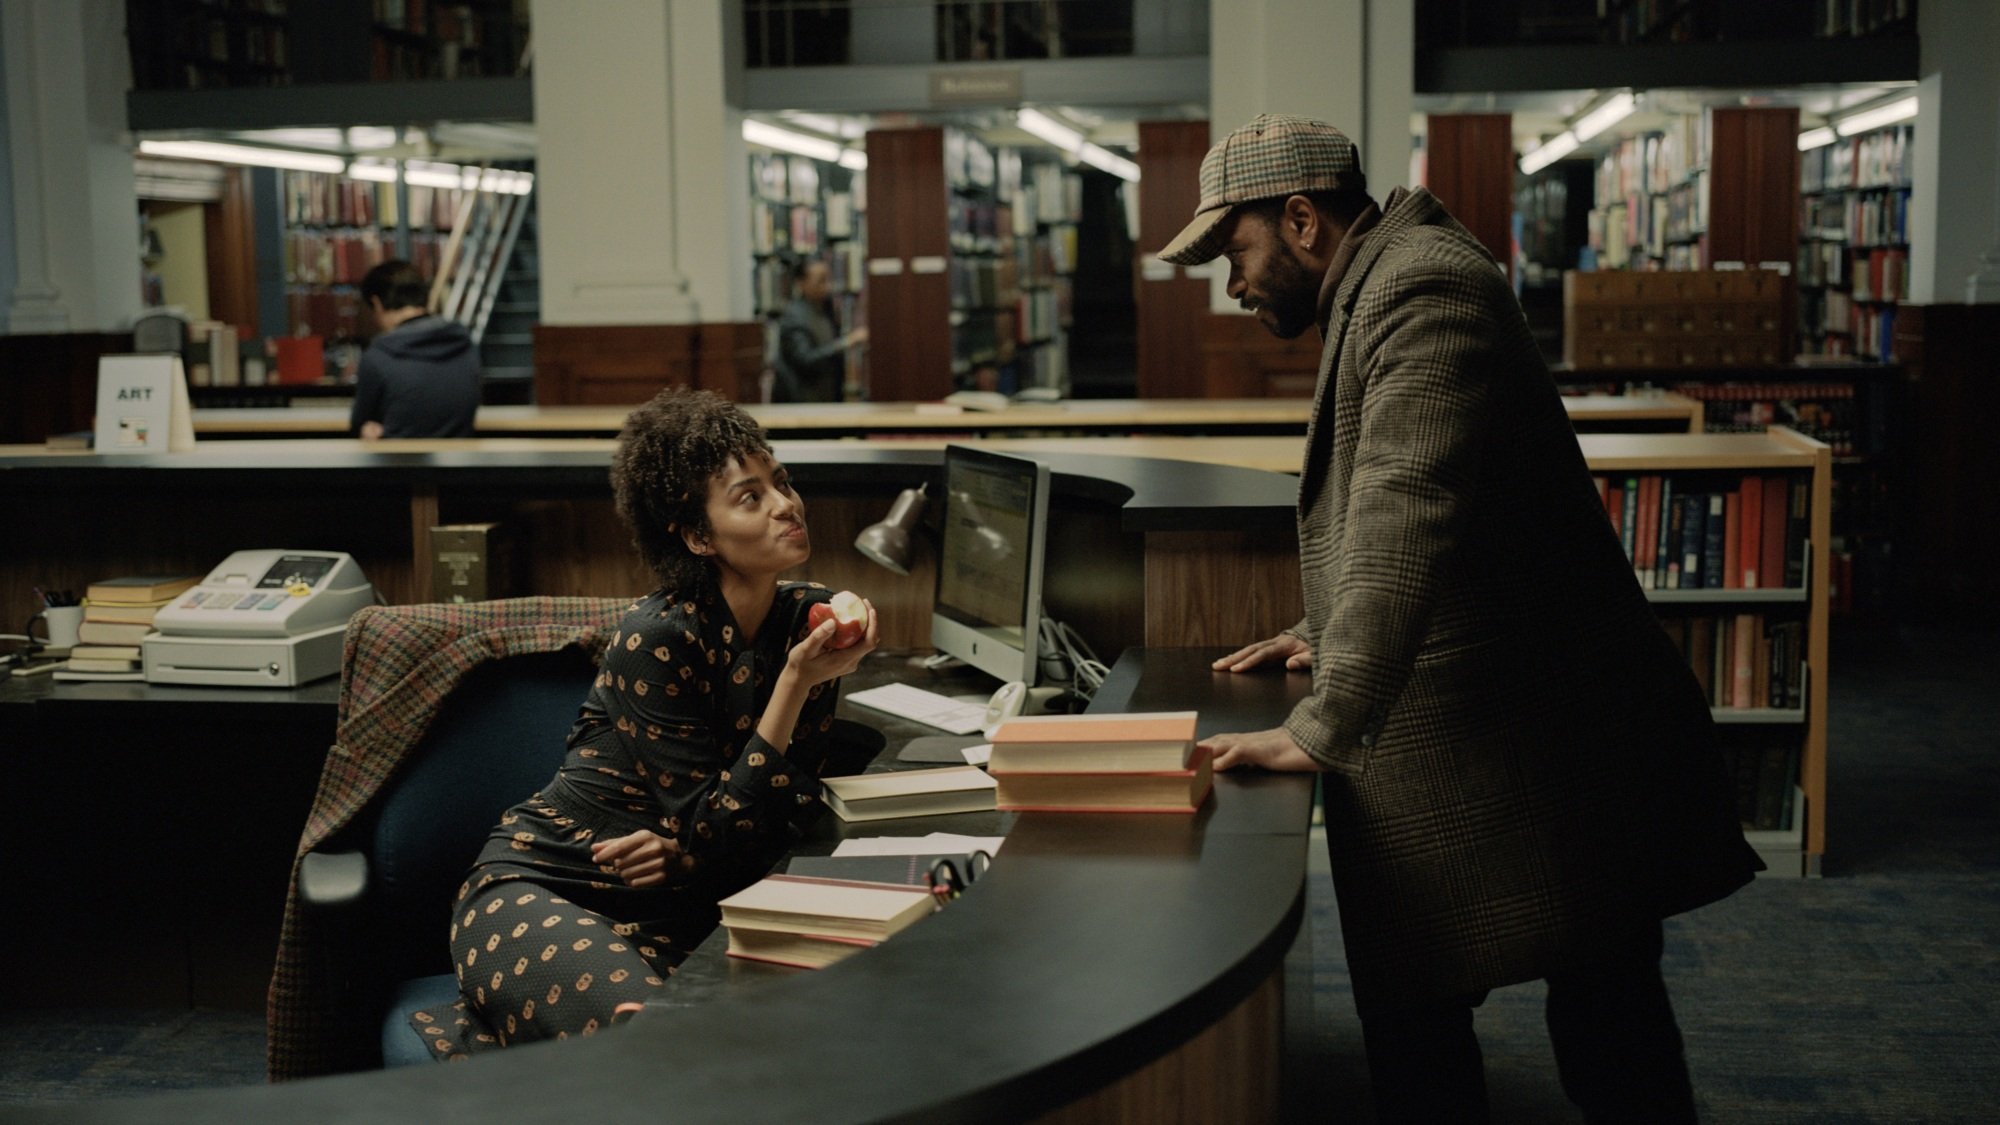 A man leans over a library desk, speaking to the woman sitting behind it.